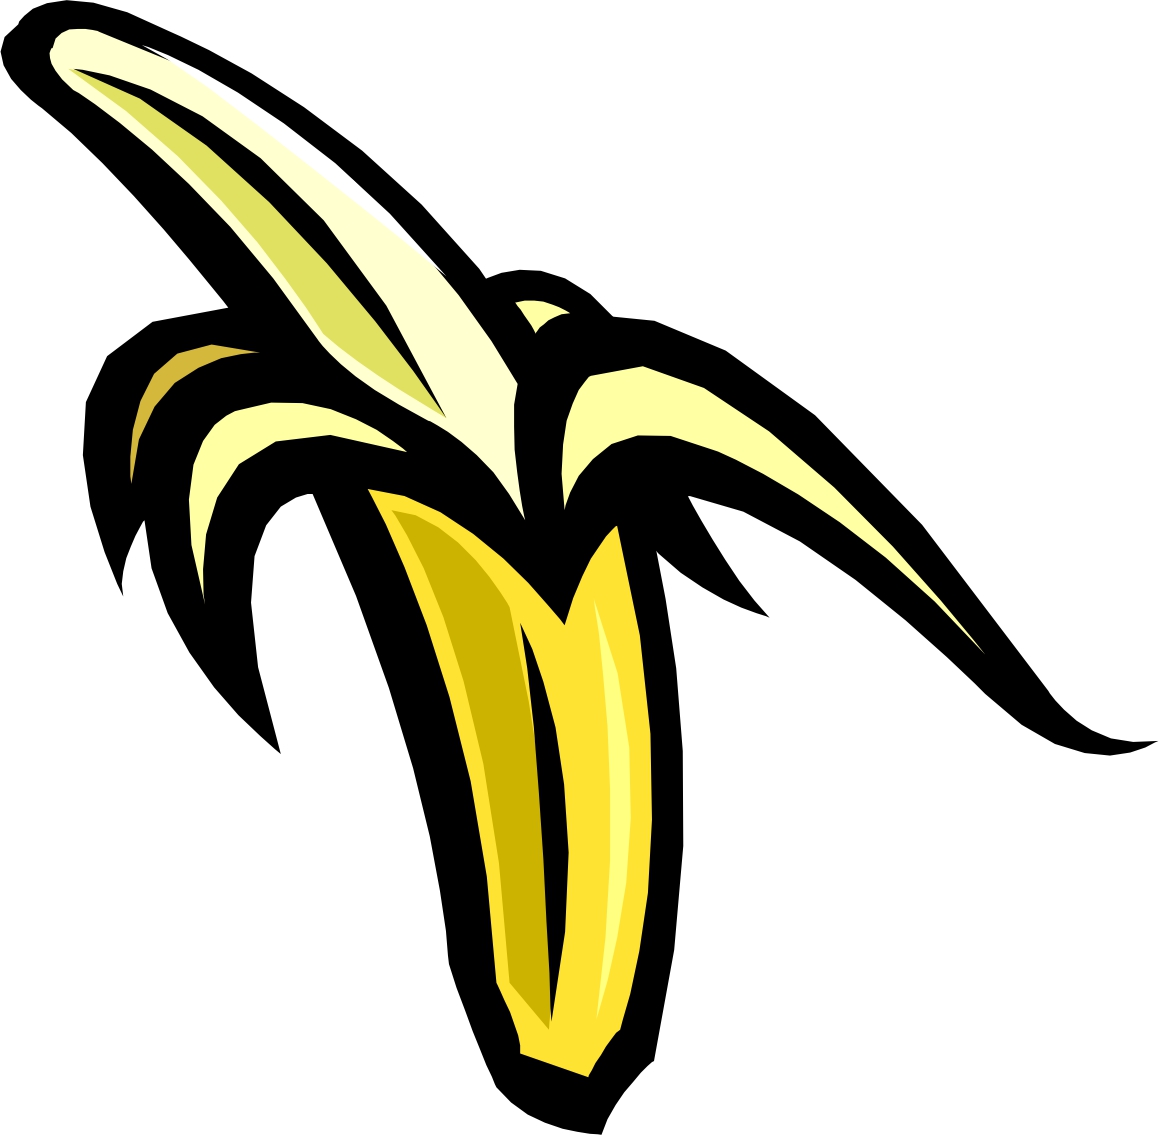 Banana Peel Cartoon Images & Pictures - Becuo